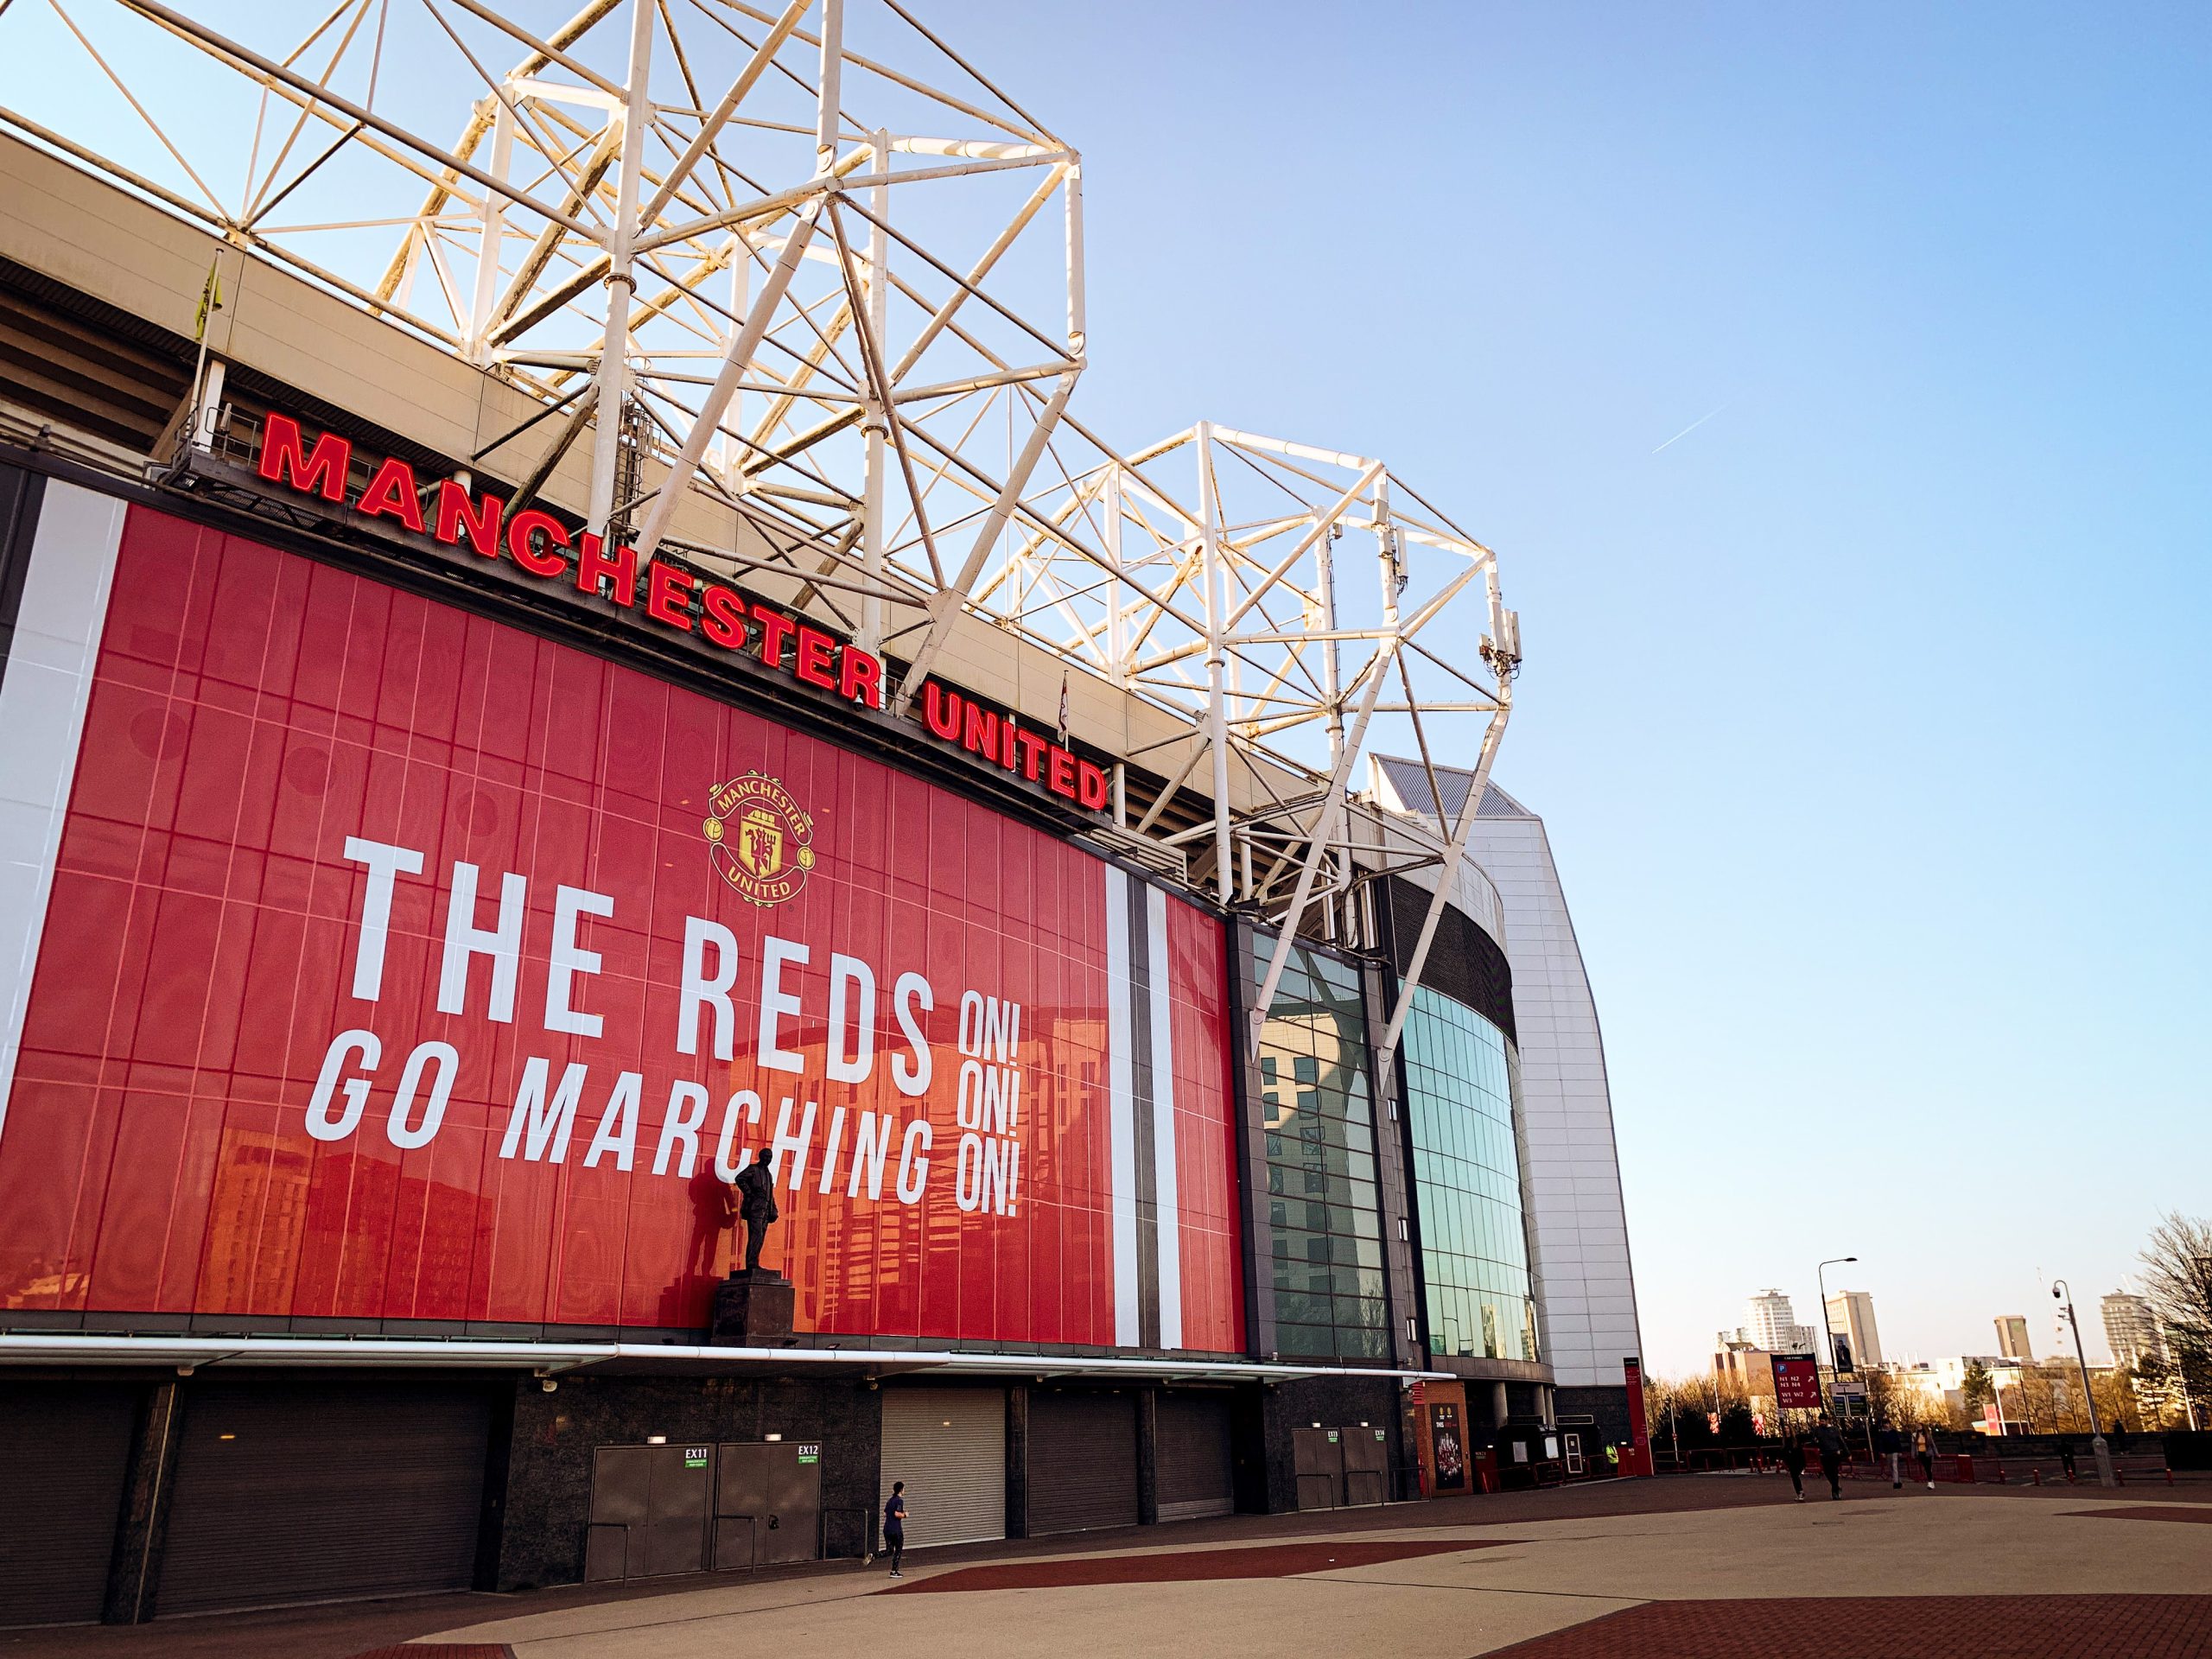 Manchester United Old Trafford